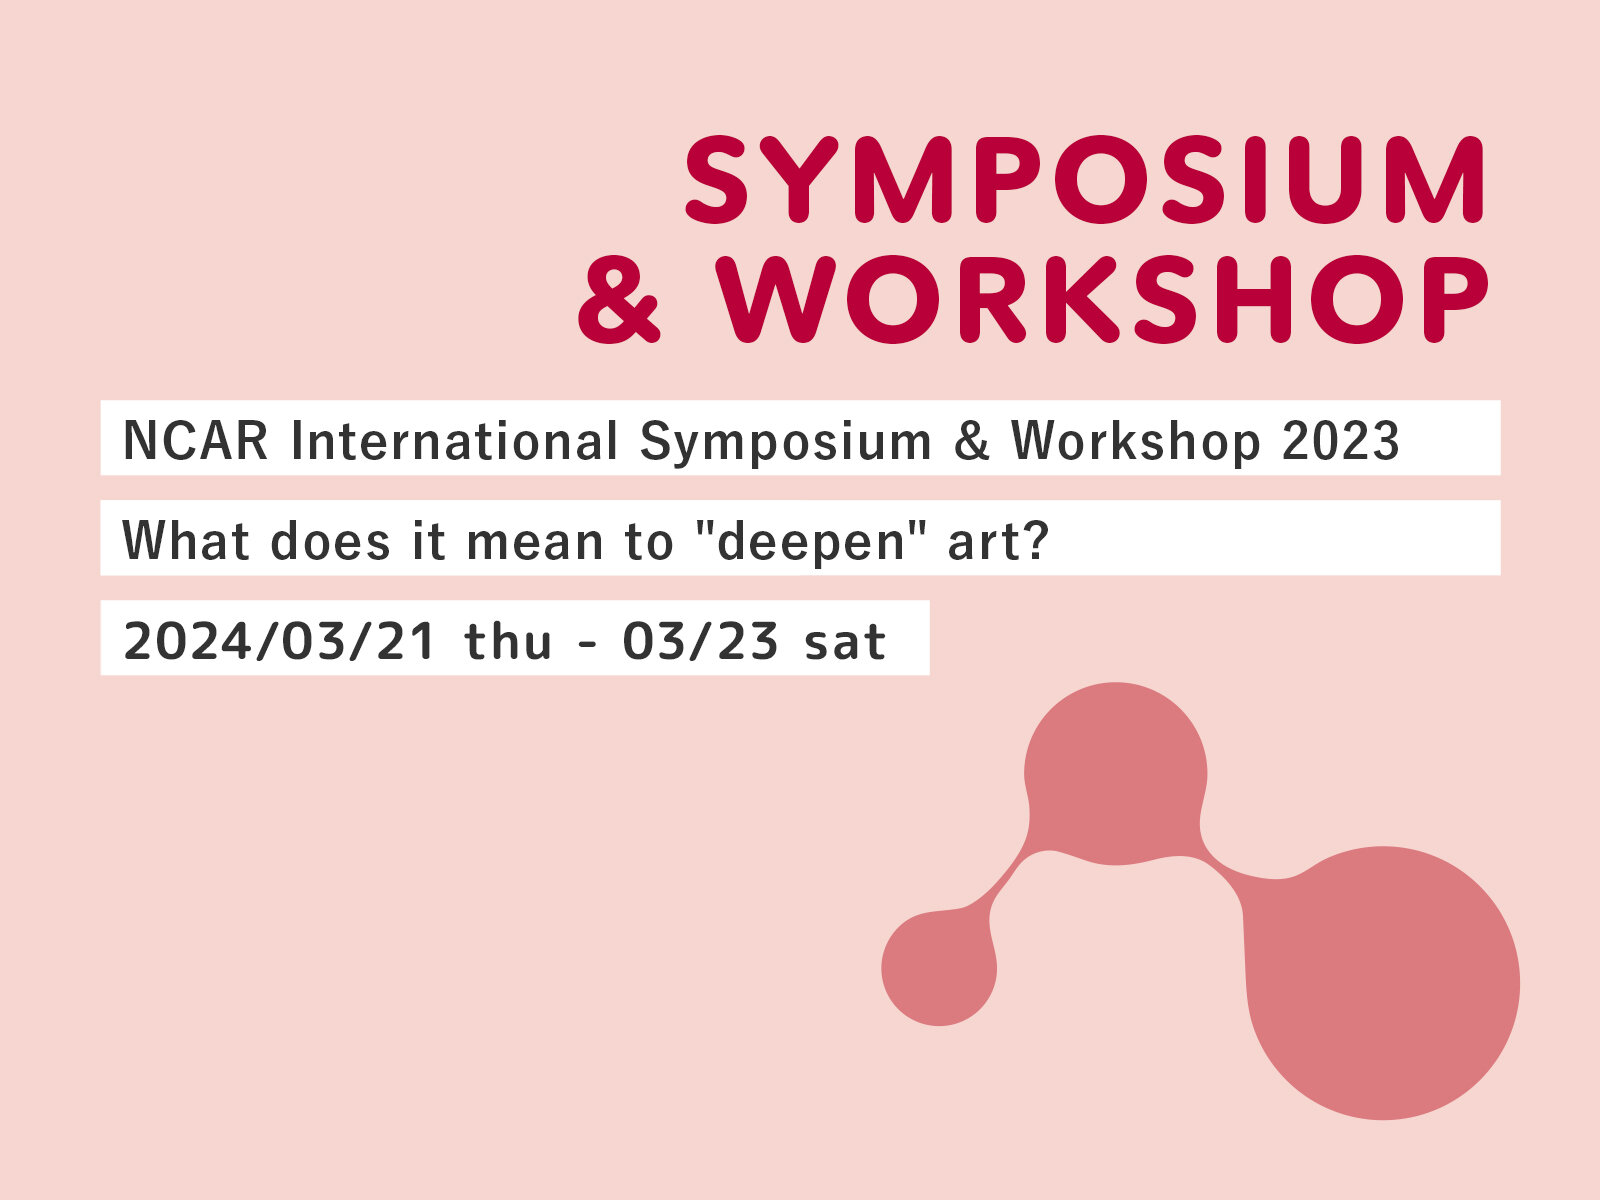 Call for Participants: National Center for Art Research International Symposium and Workshop 2023

